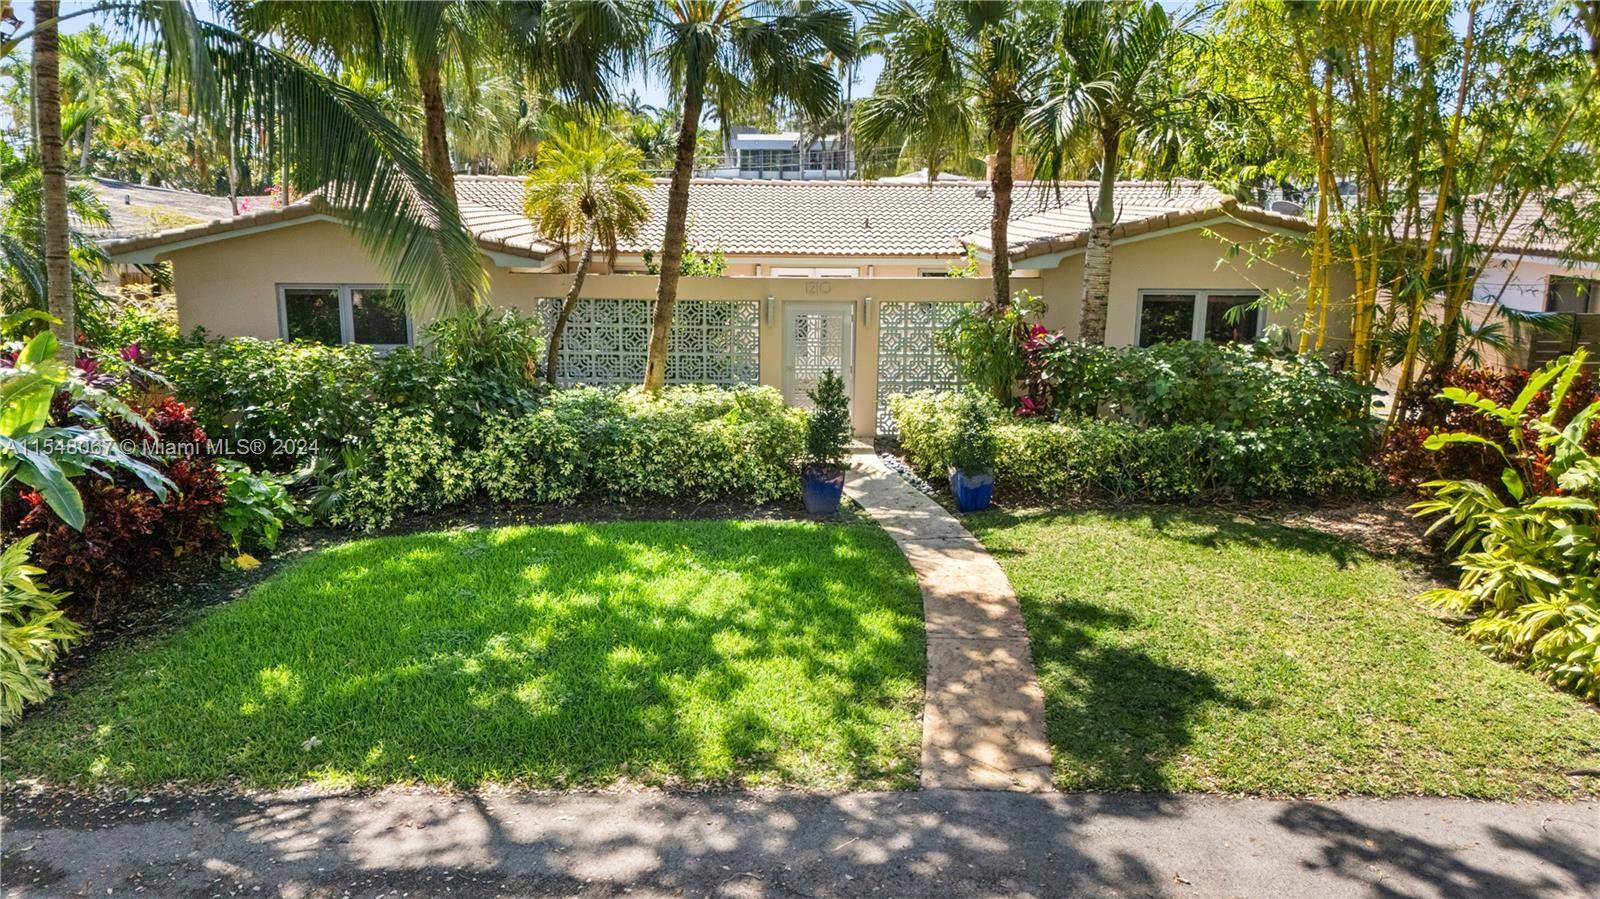 Welcome To this meticulously maintained home nestled in the sought after Miami Shores area.